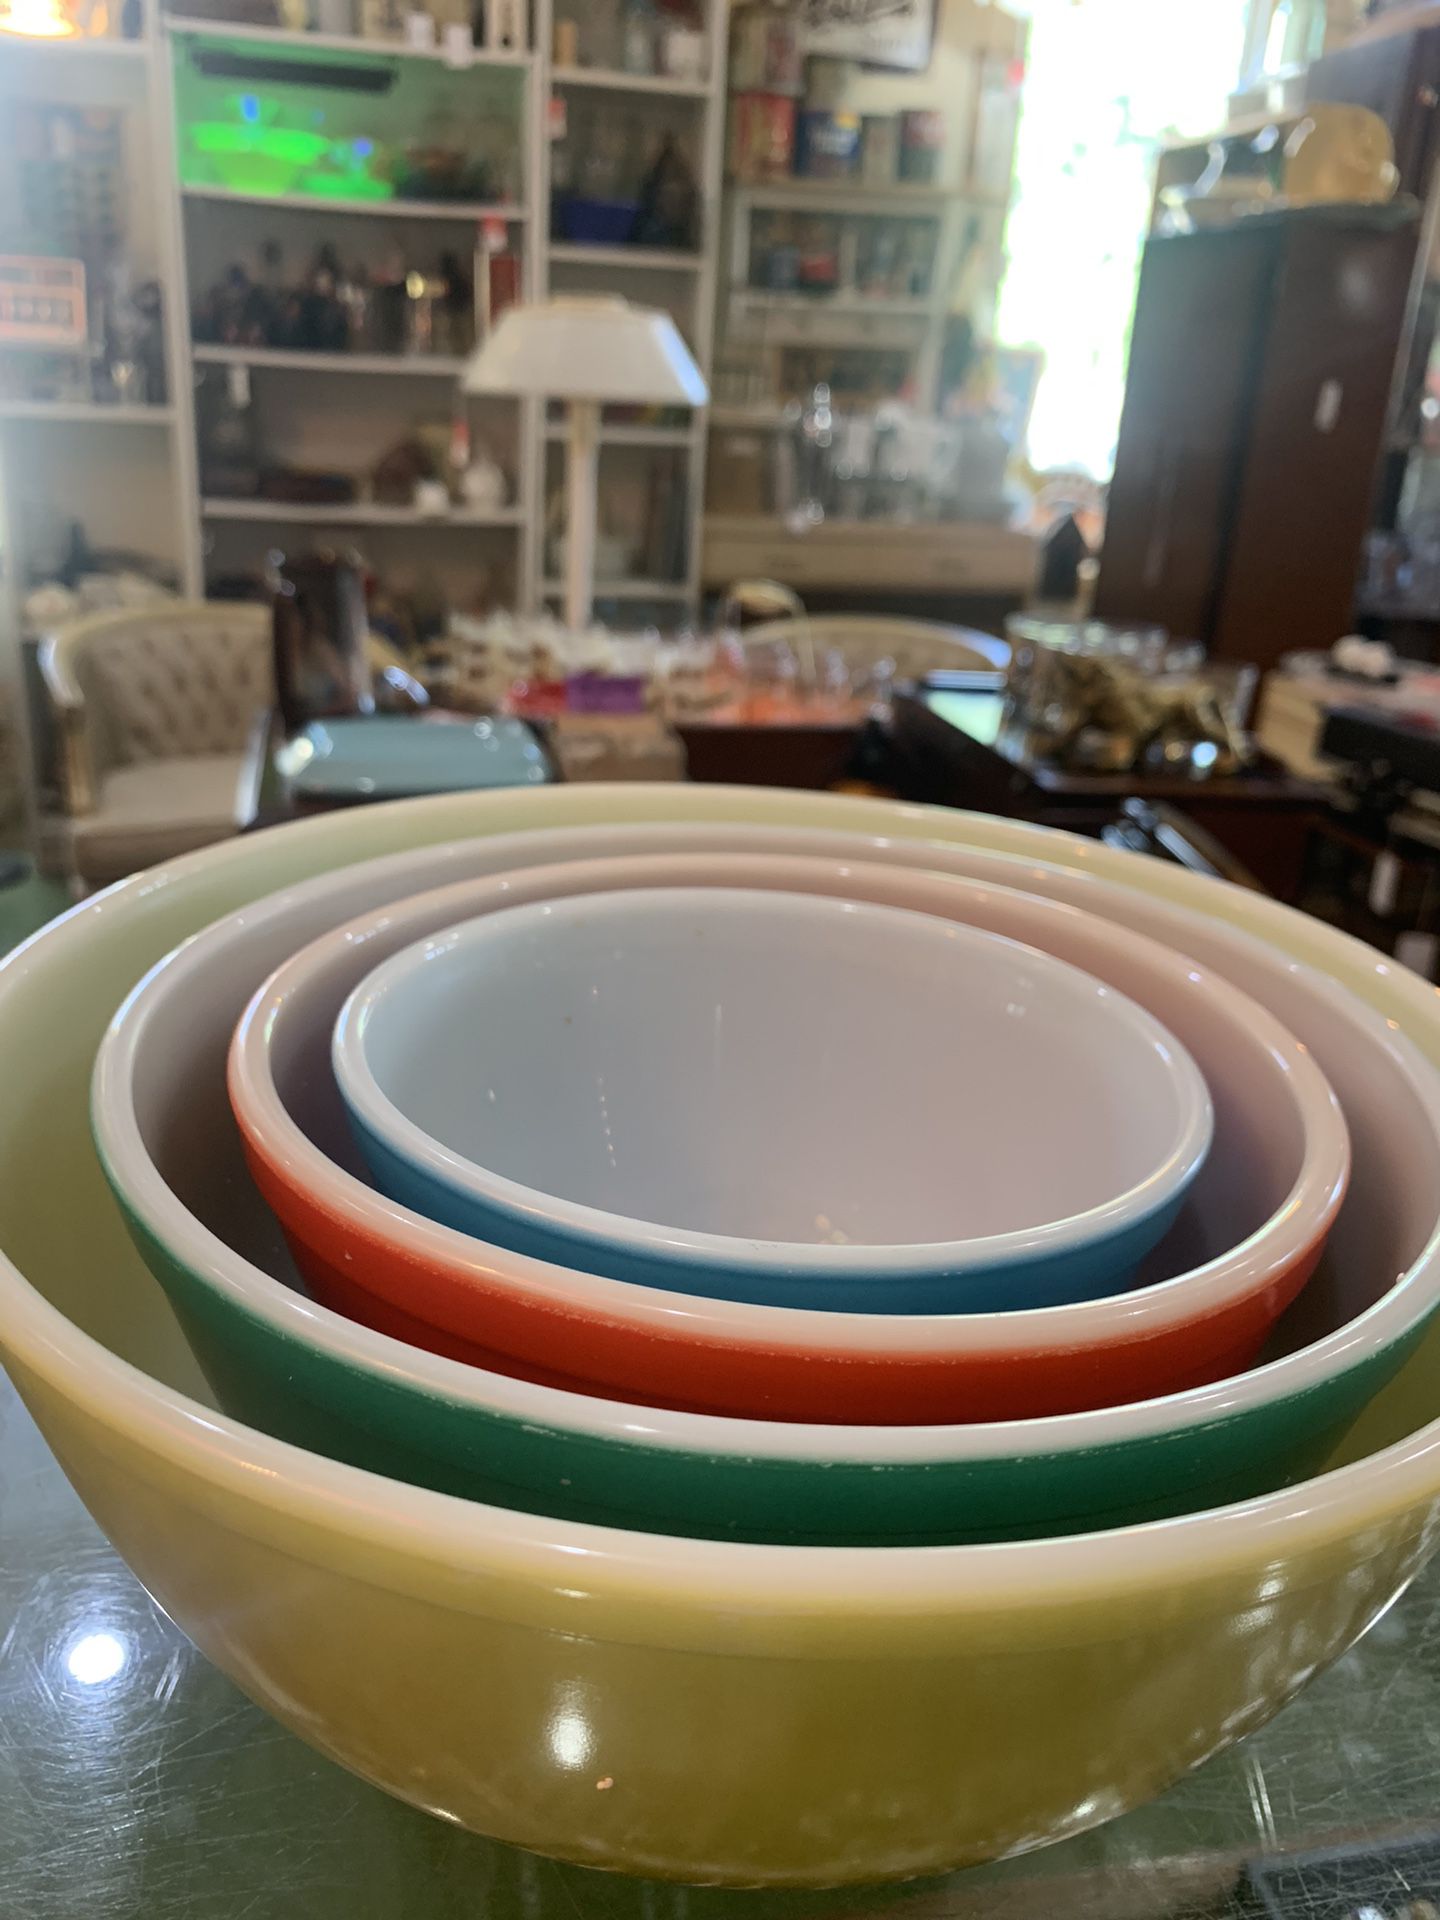 Pyrex primary set. Original authentic. Full set. 125.00.  Johanna at Antiques and More. Located at 316b Main Street Buda. Antiques vintage retro furni